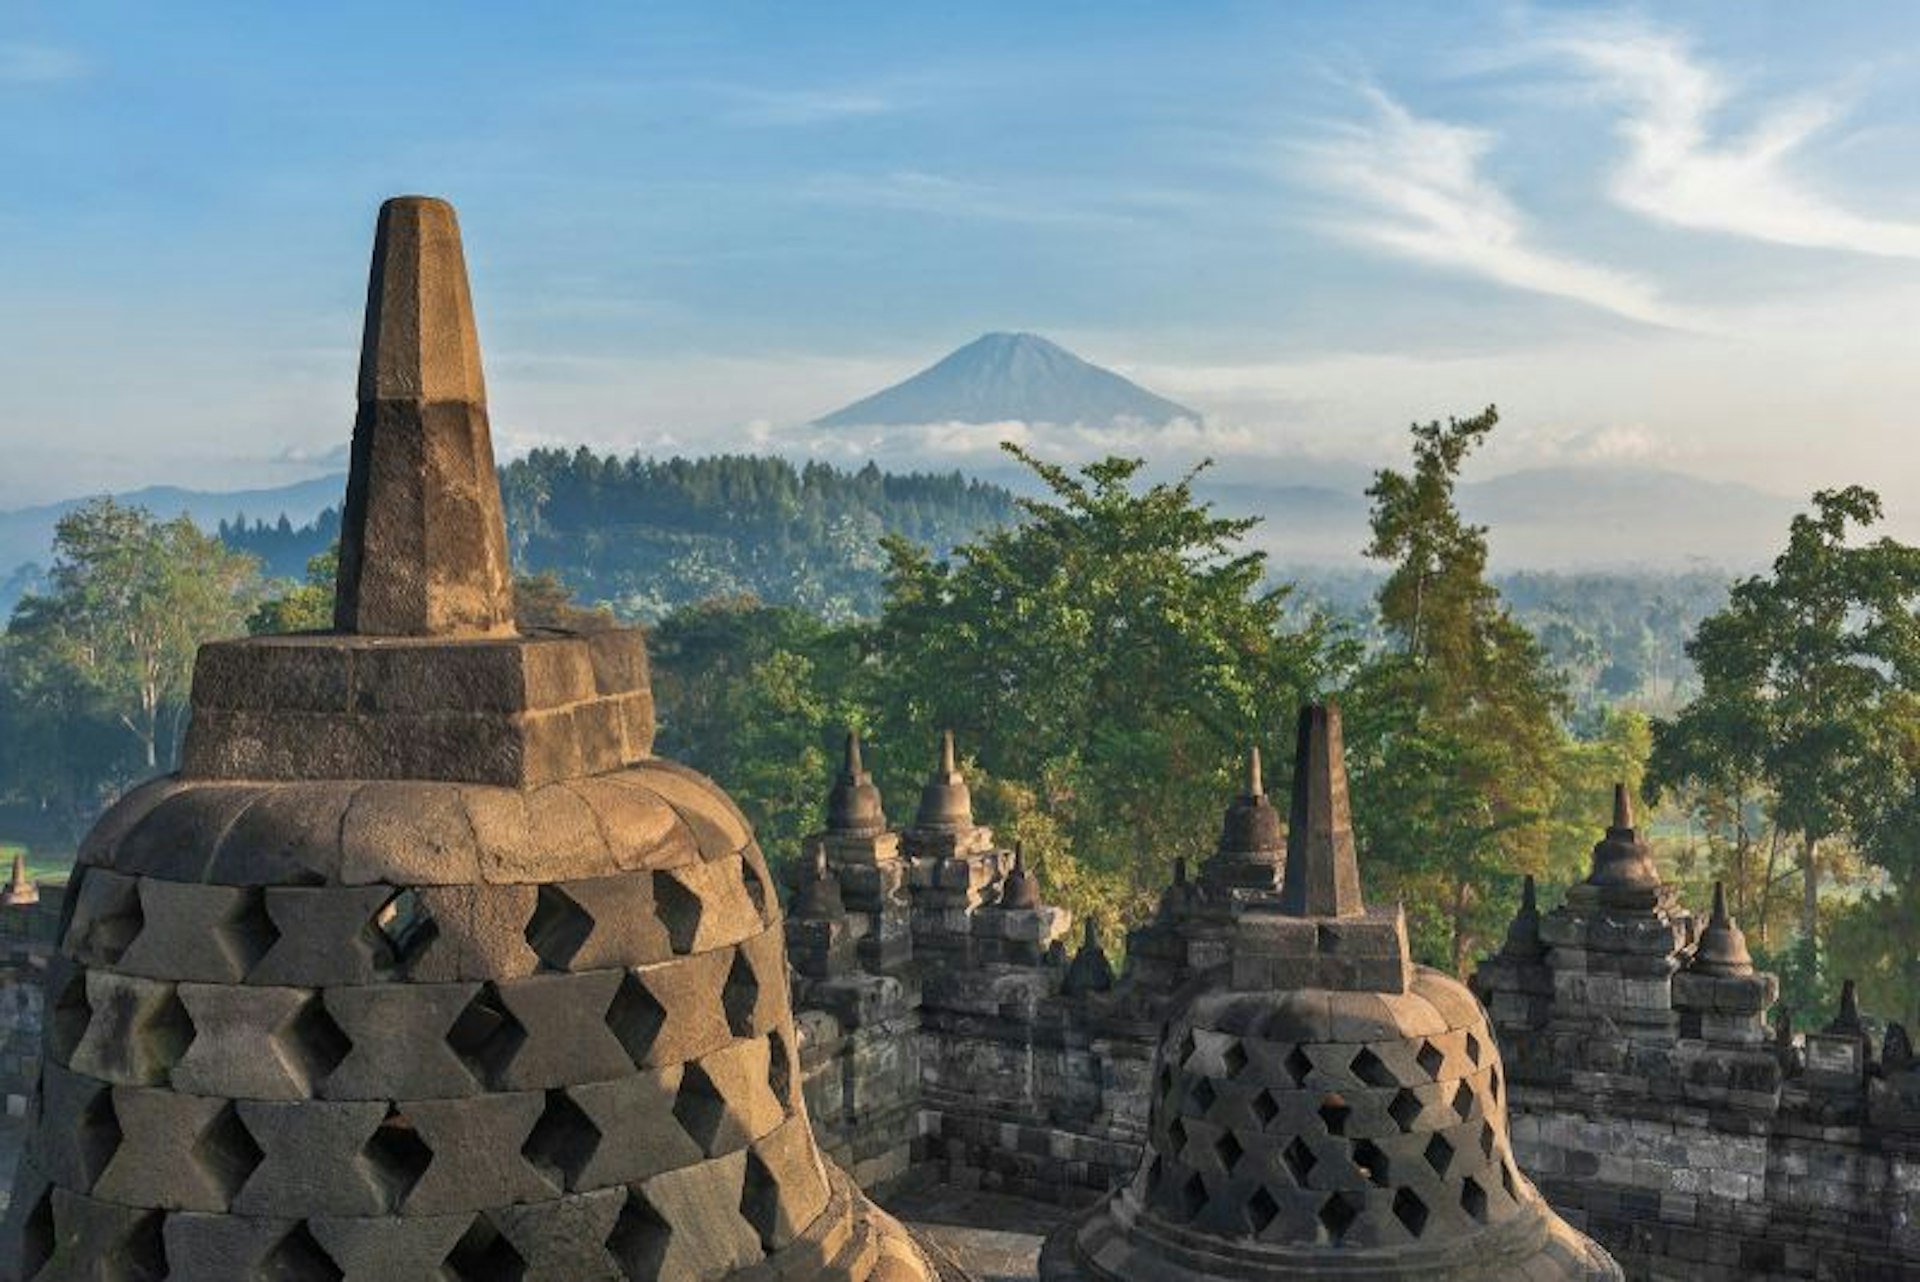 View from the temple of Borobudur, Java